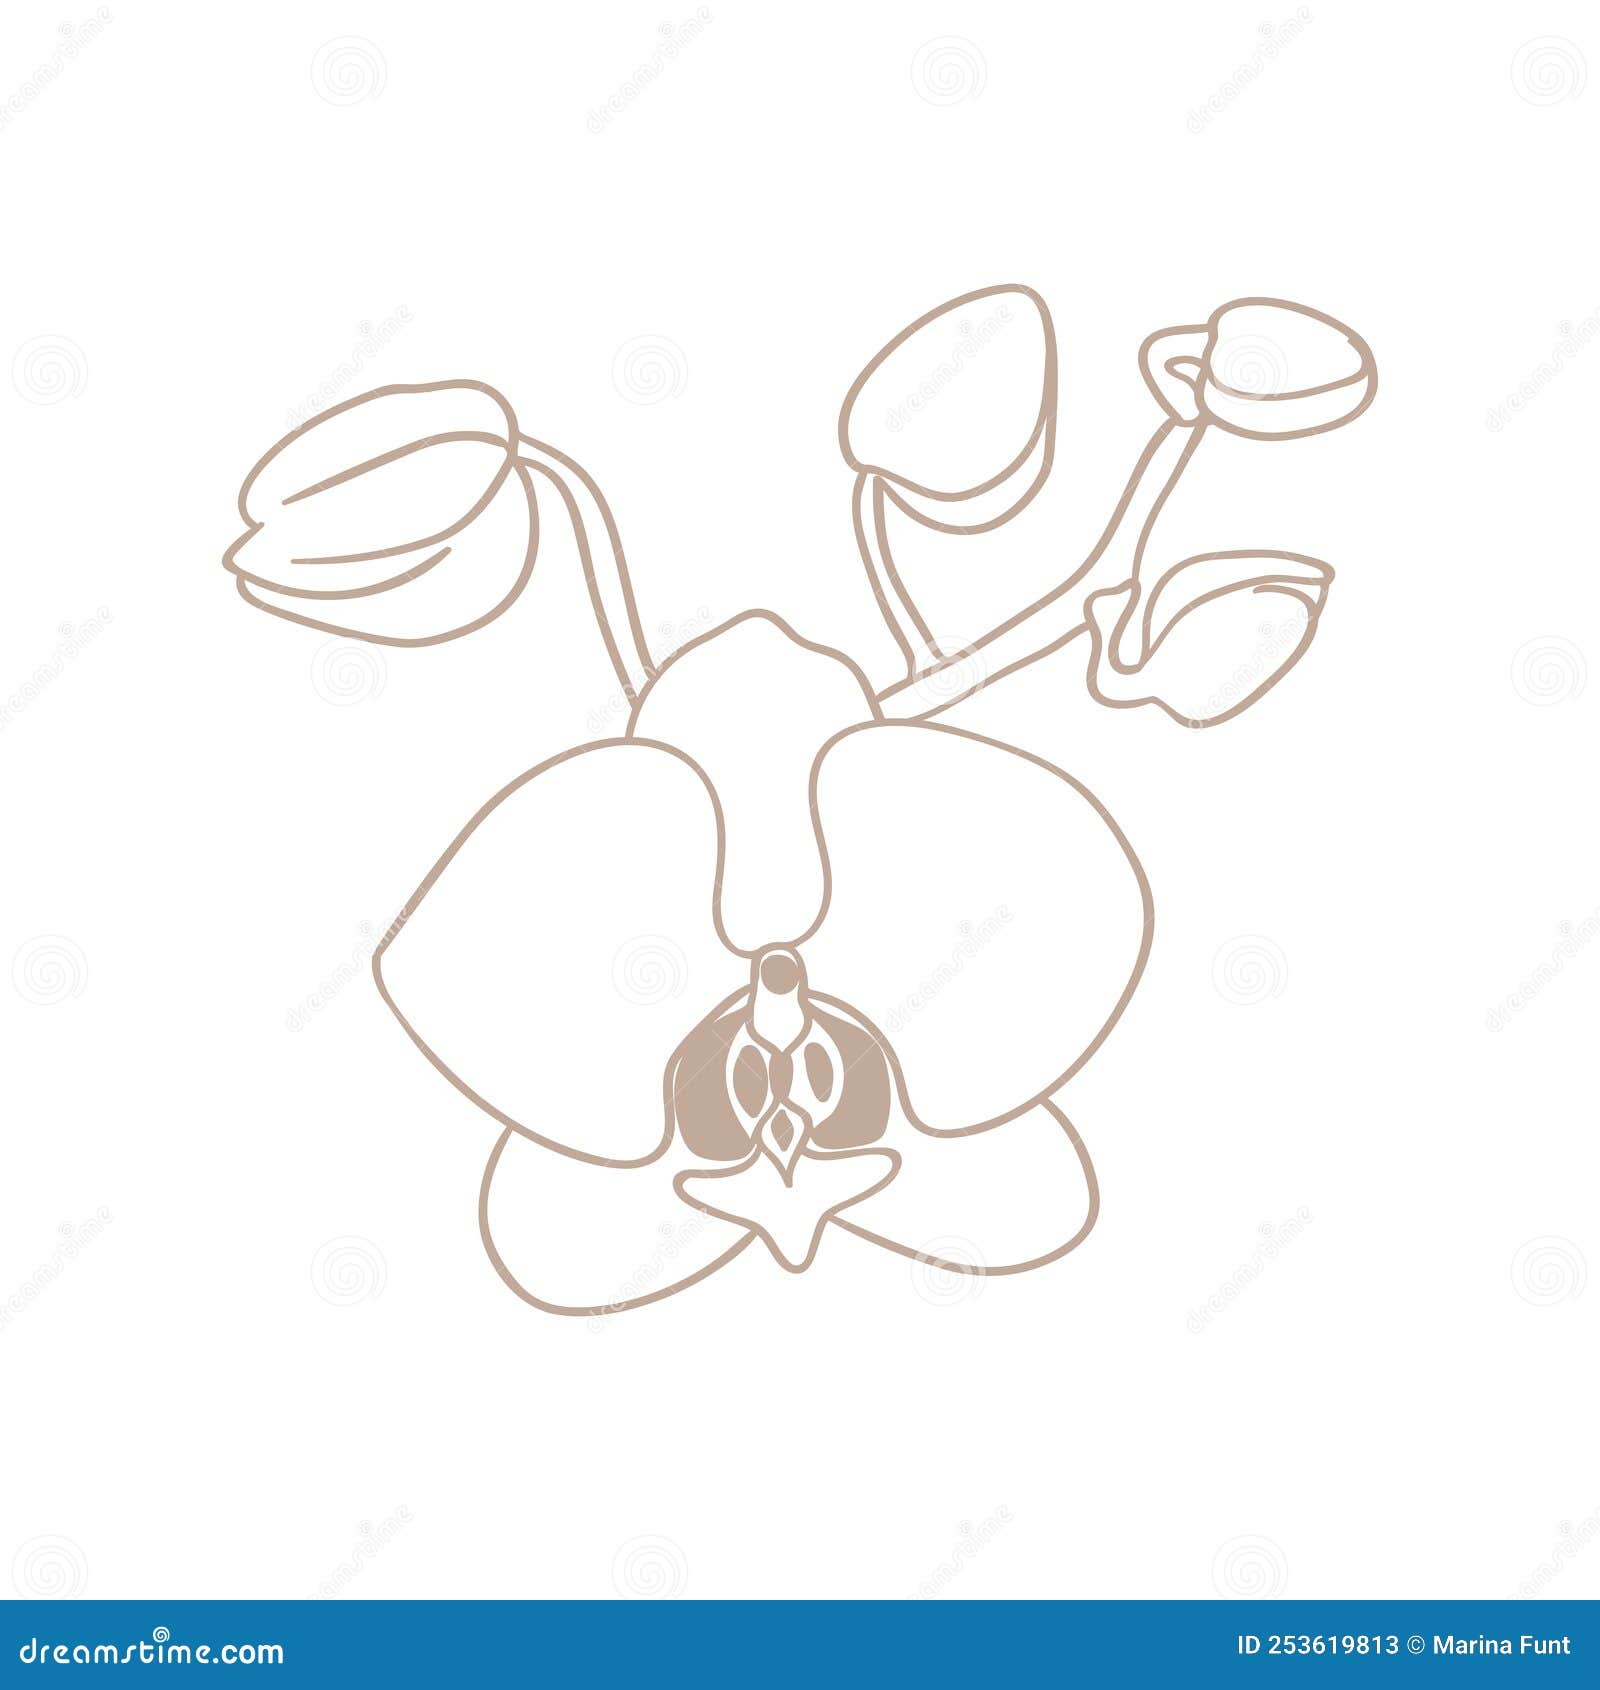 How to Draw a Beautiful Orchid - Really Easy Drawing Tutorial